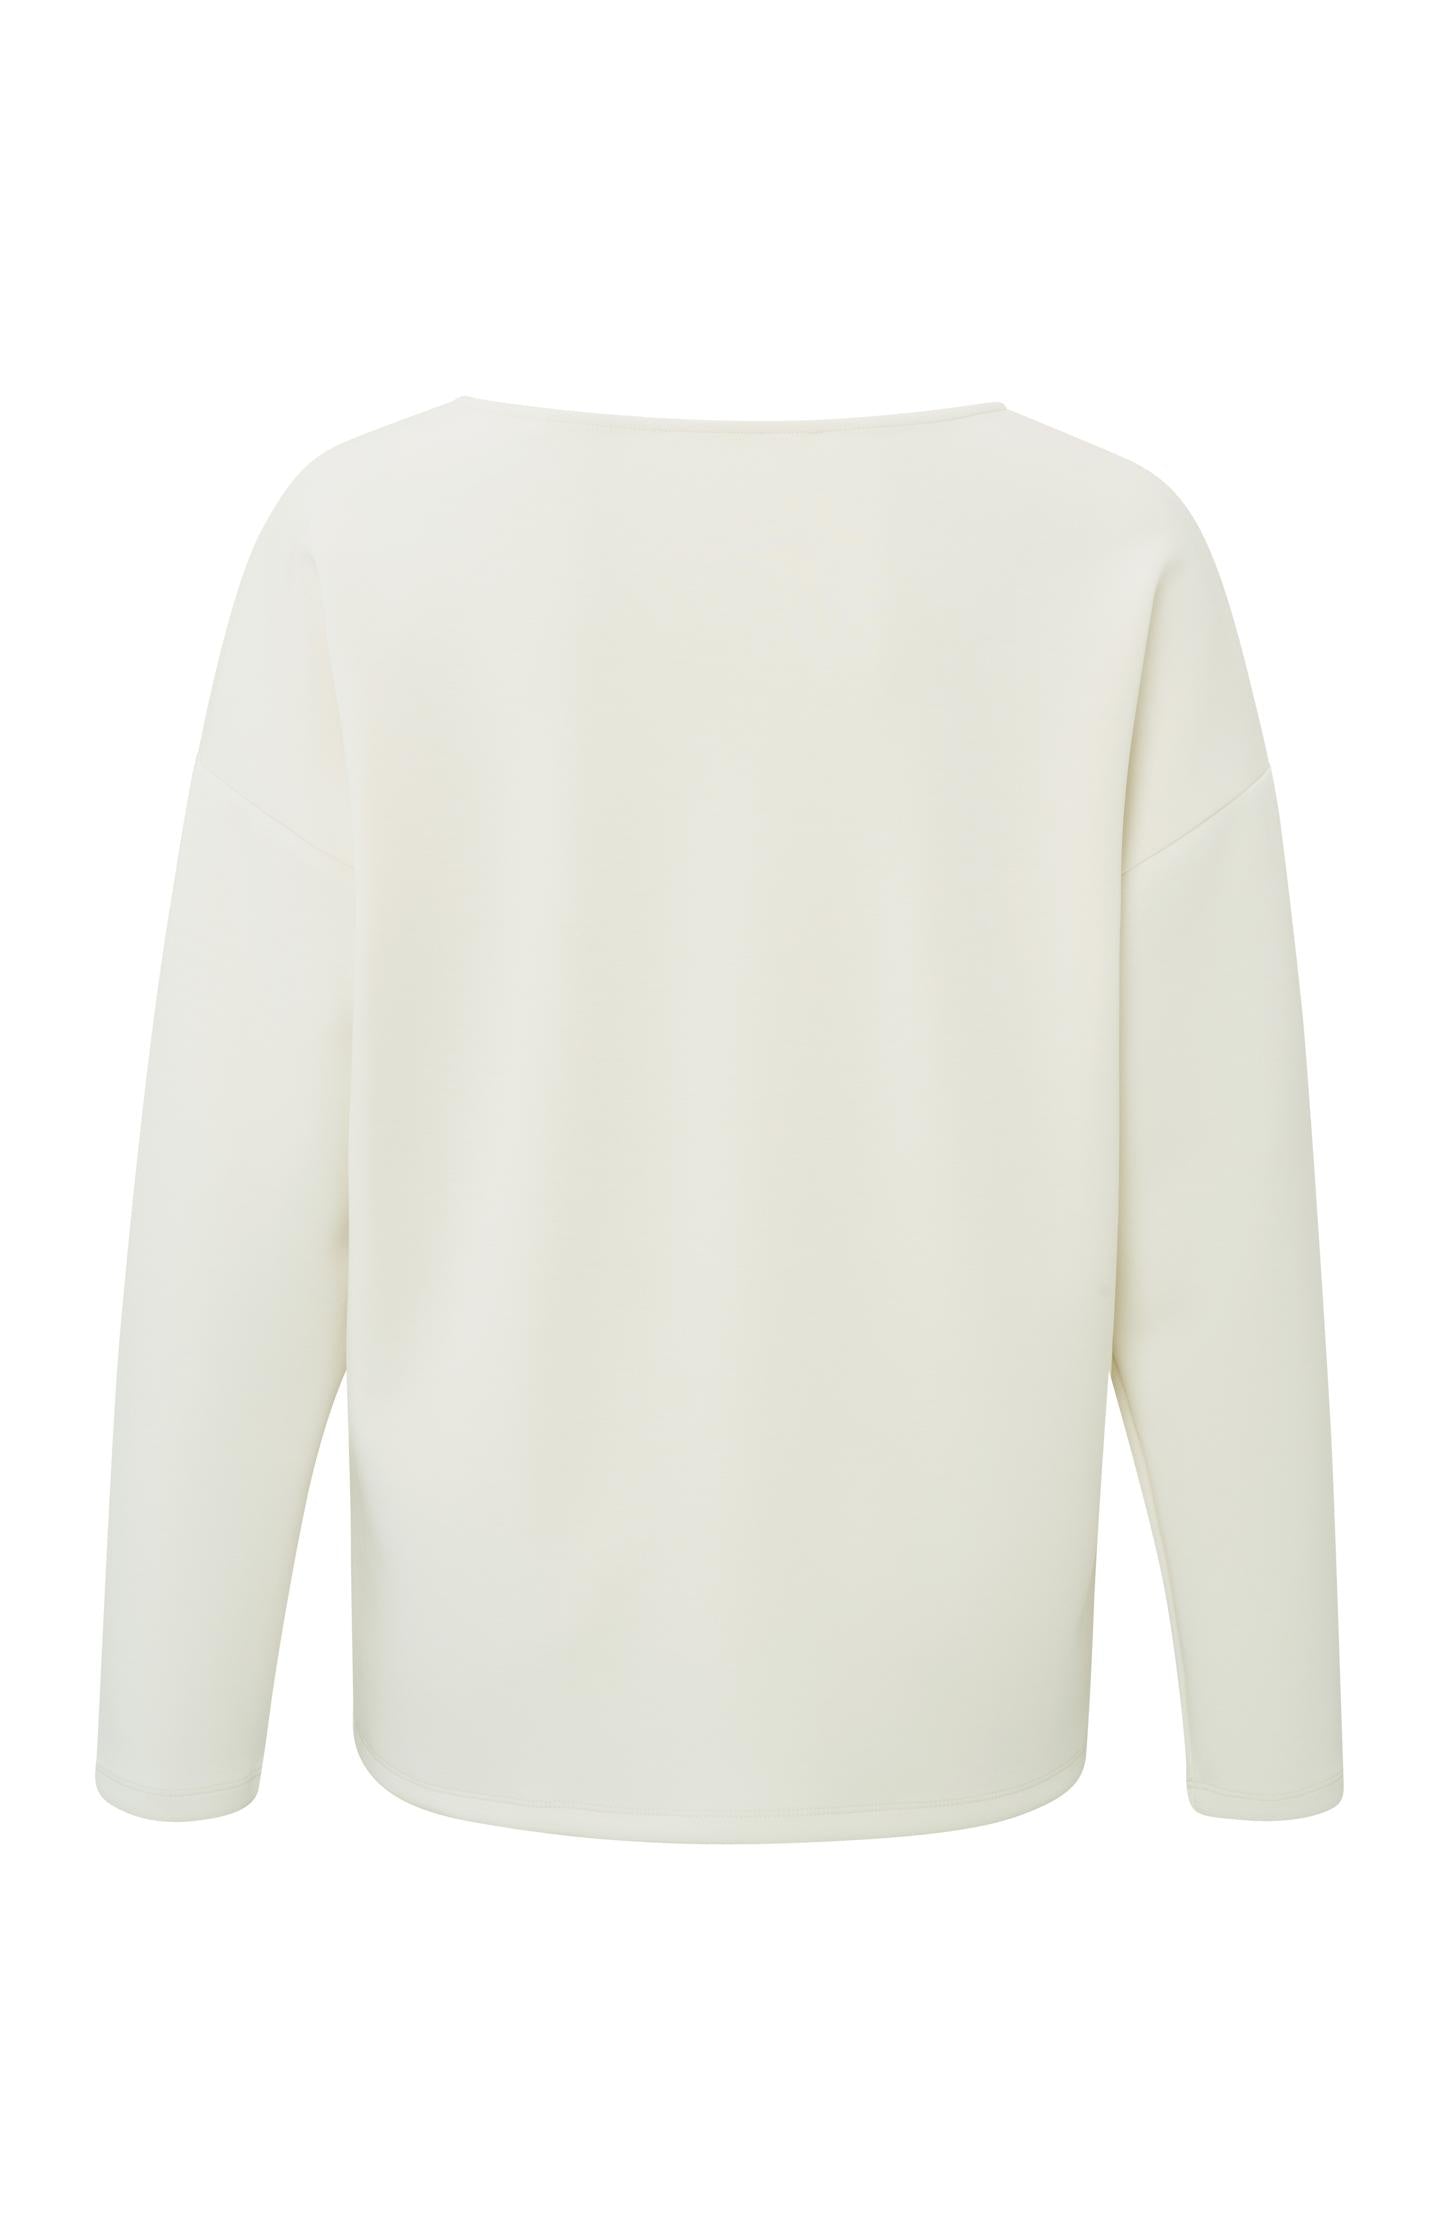 Sweatshirt with deep V-neck, long sleeves in wide fit